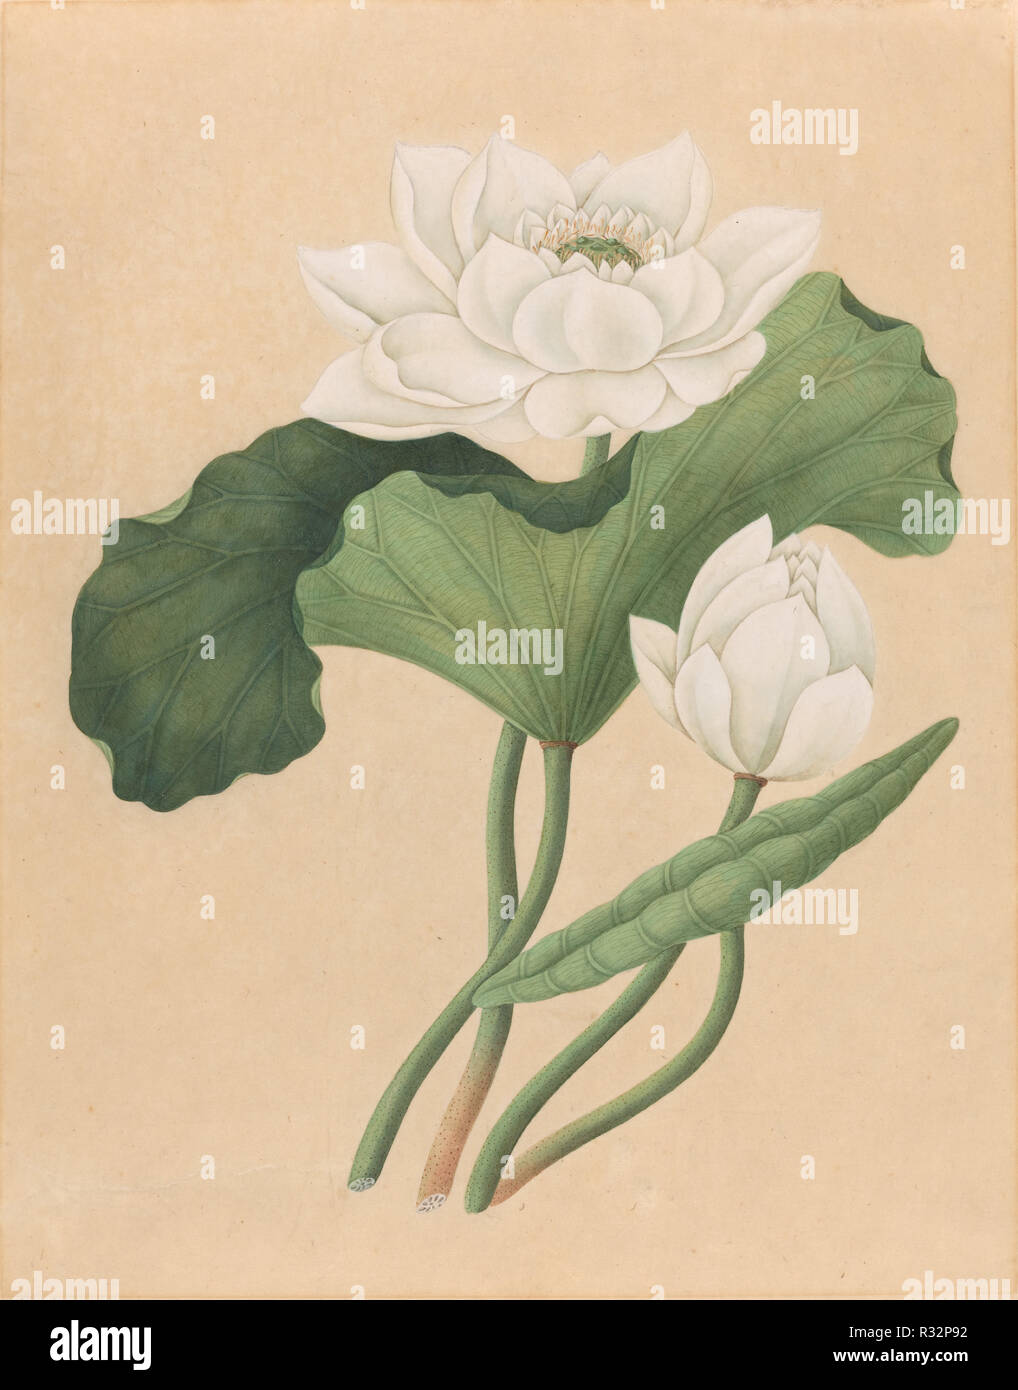 East Indian Lotus (Nelumbo nucifera). Dated: late 19th century. Dimensions: overall: 42.2 x 33.4 cm (16 5/8 x 13 1/8 in.). Medium: gouache on oriental paper. Museum: National Gallery of Art, Washington DC. Author: British 19th Century. Stock Photo